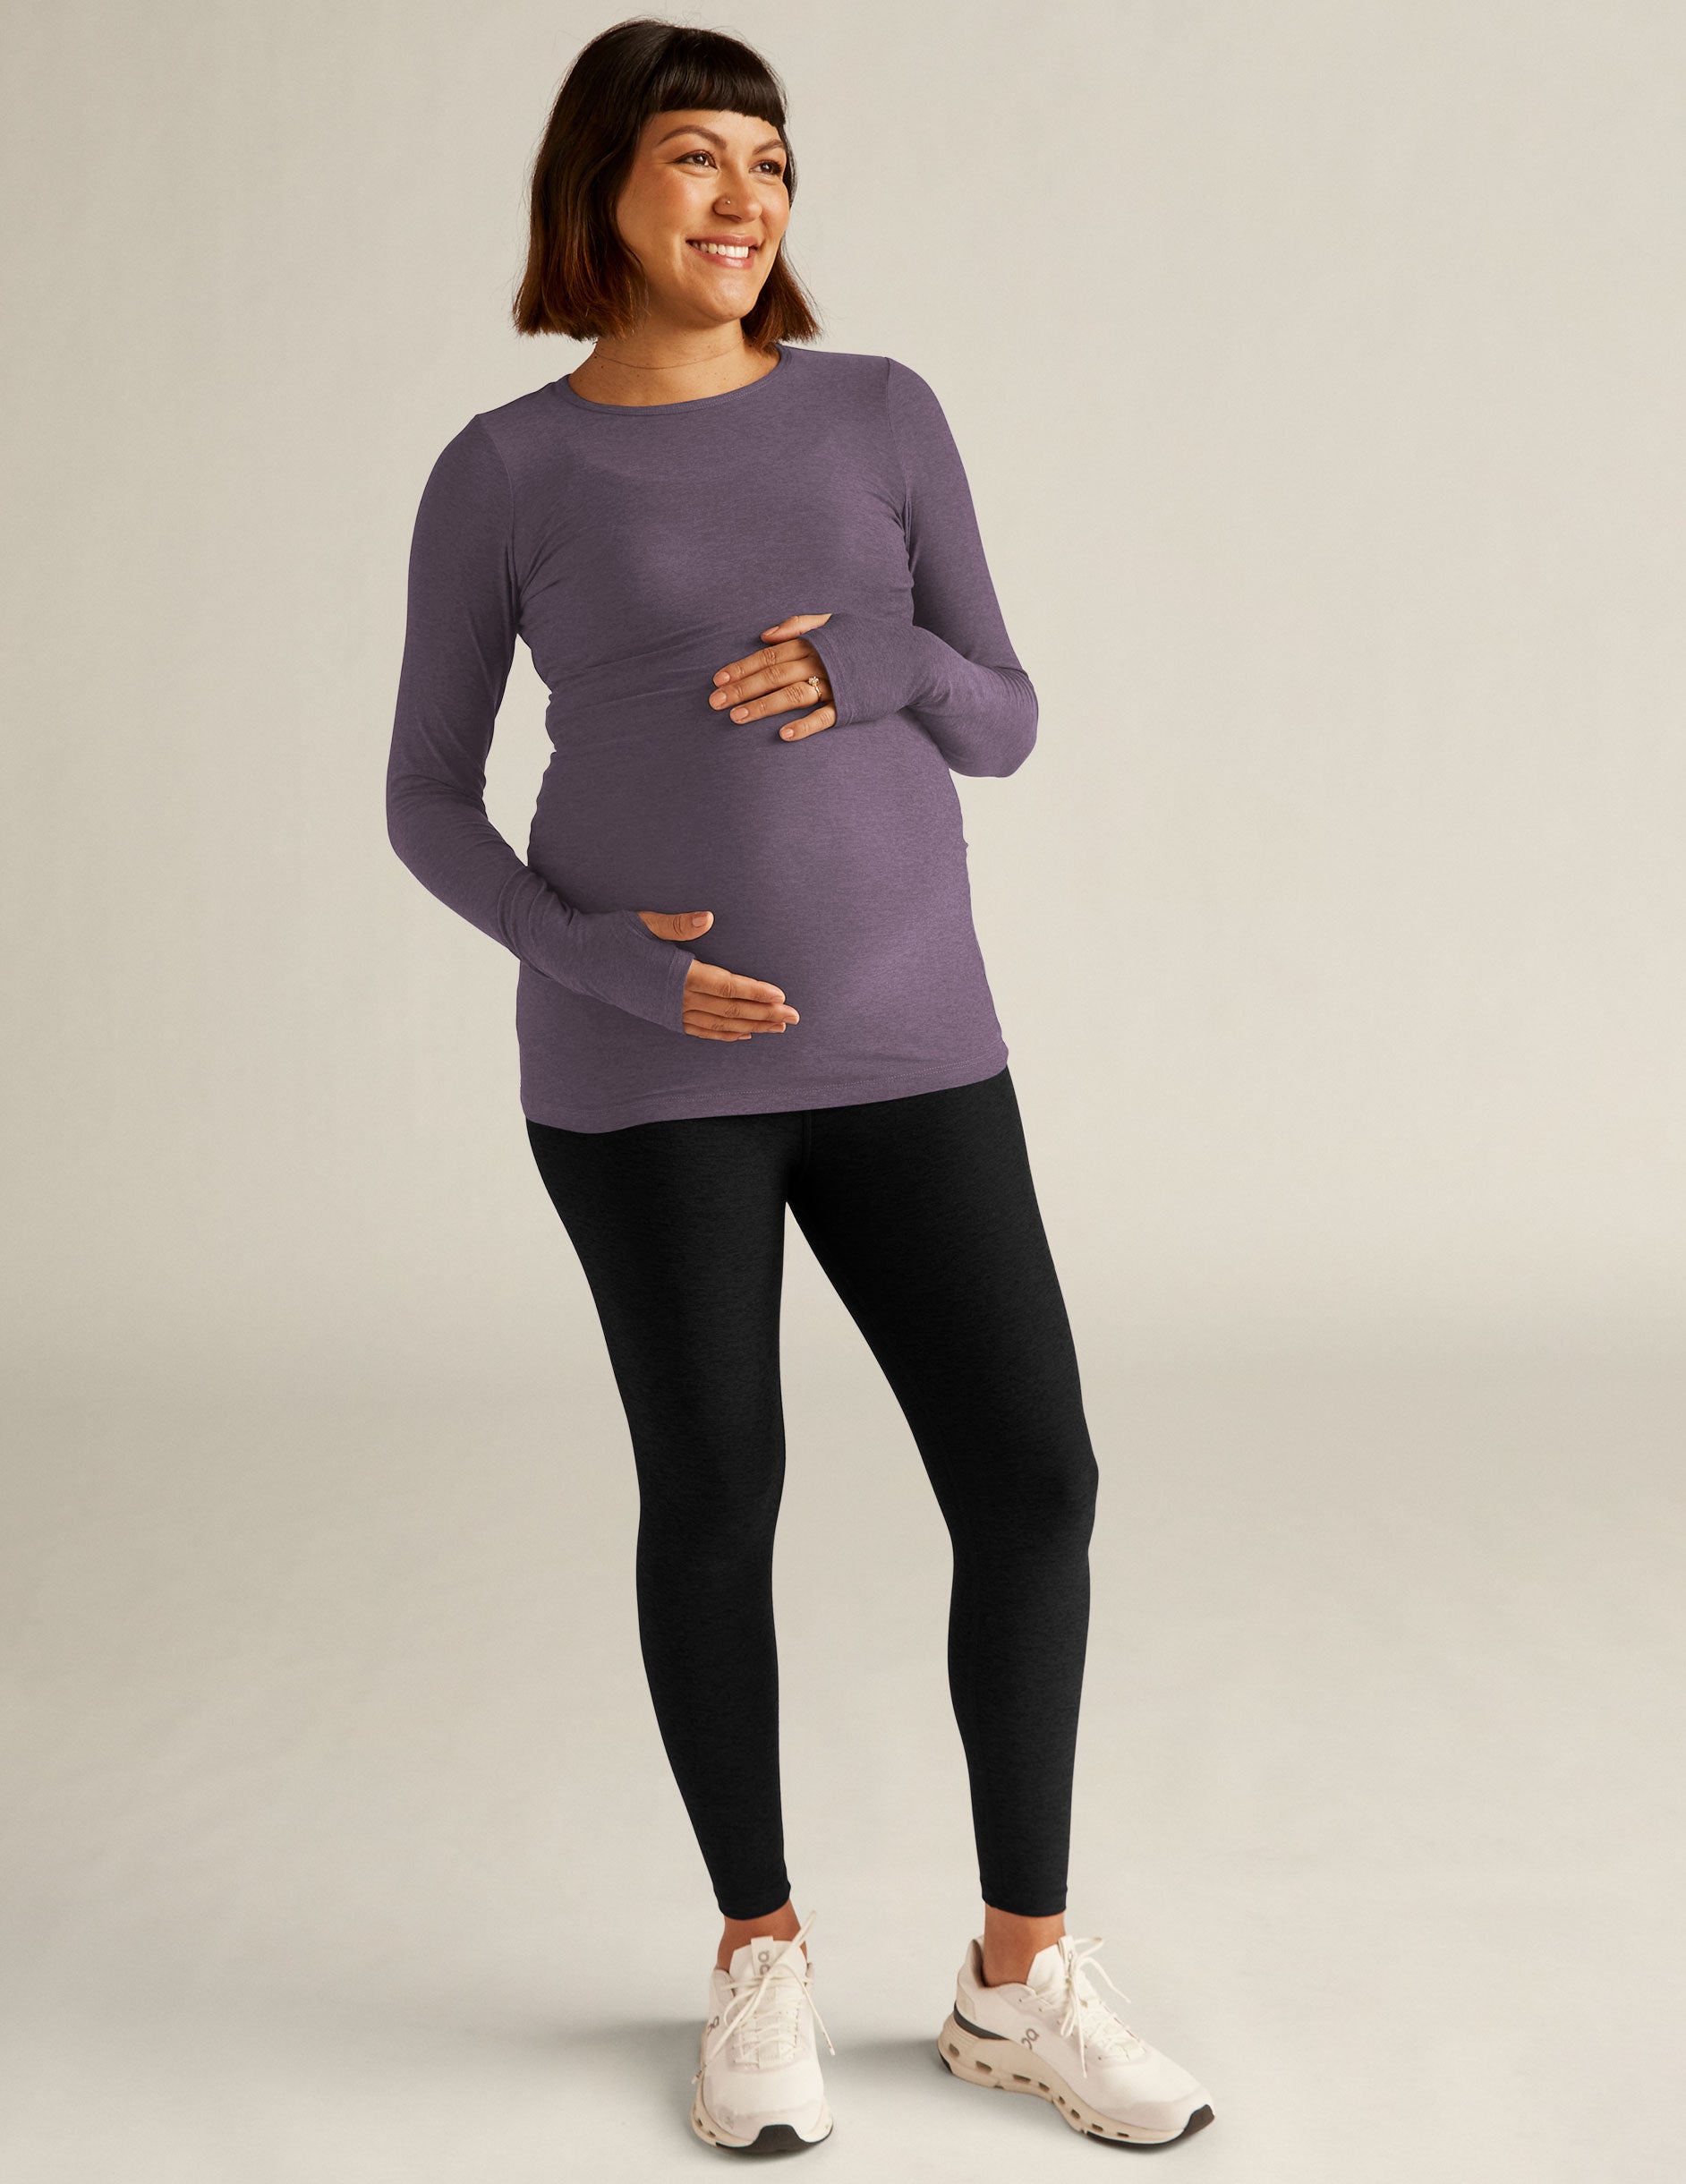 purple long sleeve, scoop neck maternity top with thumb holes. 